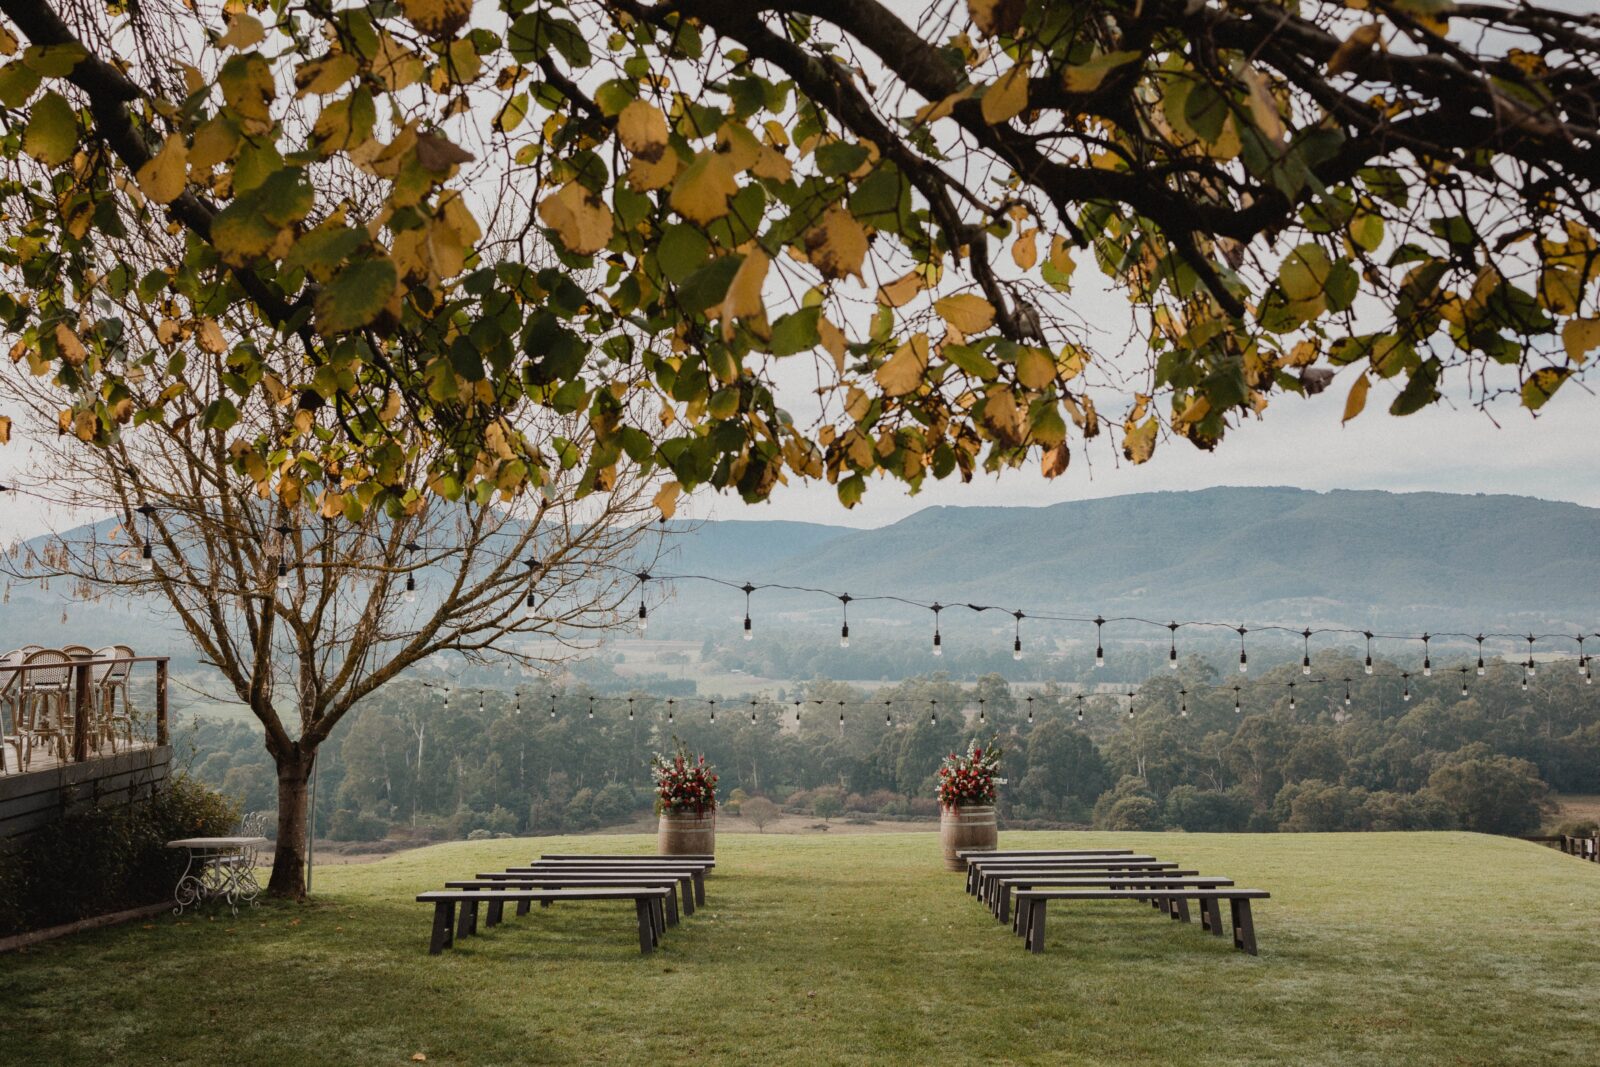 A ceremony set-up on The Riverstone Estate's lawn during autumn.